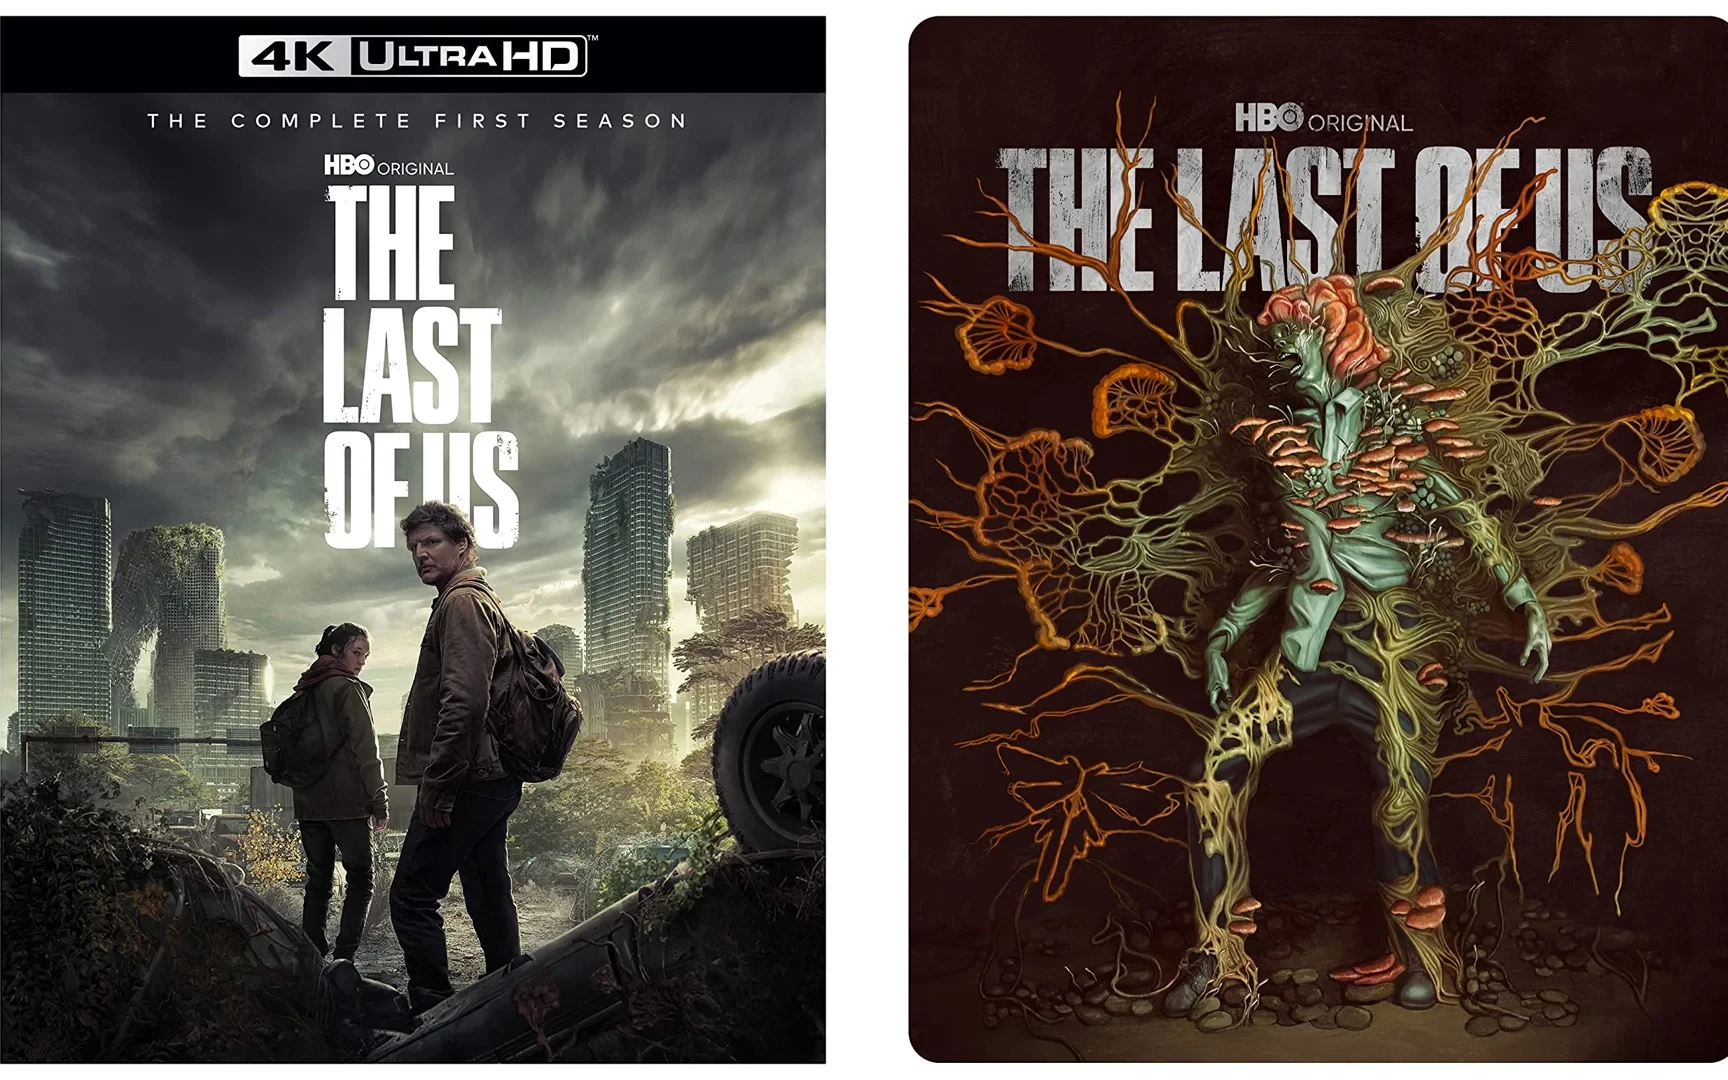 The Last of Us Blu-ray